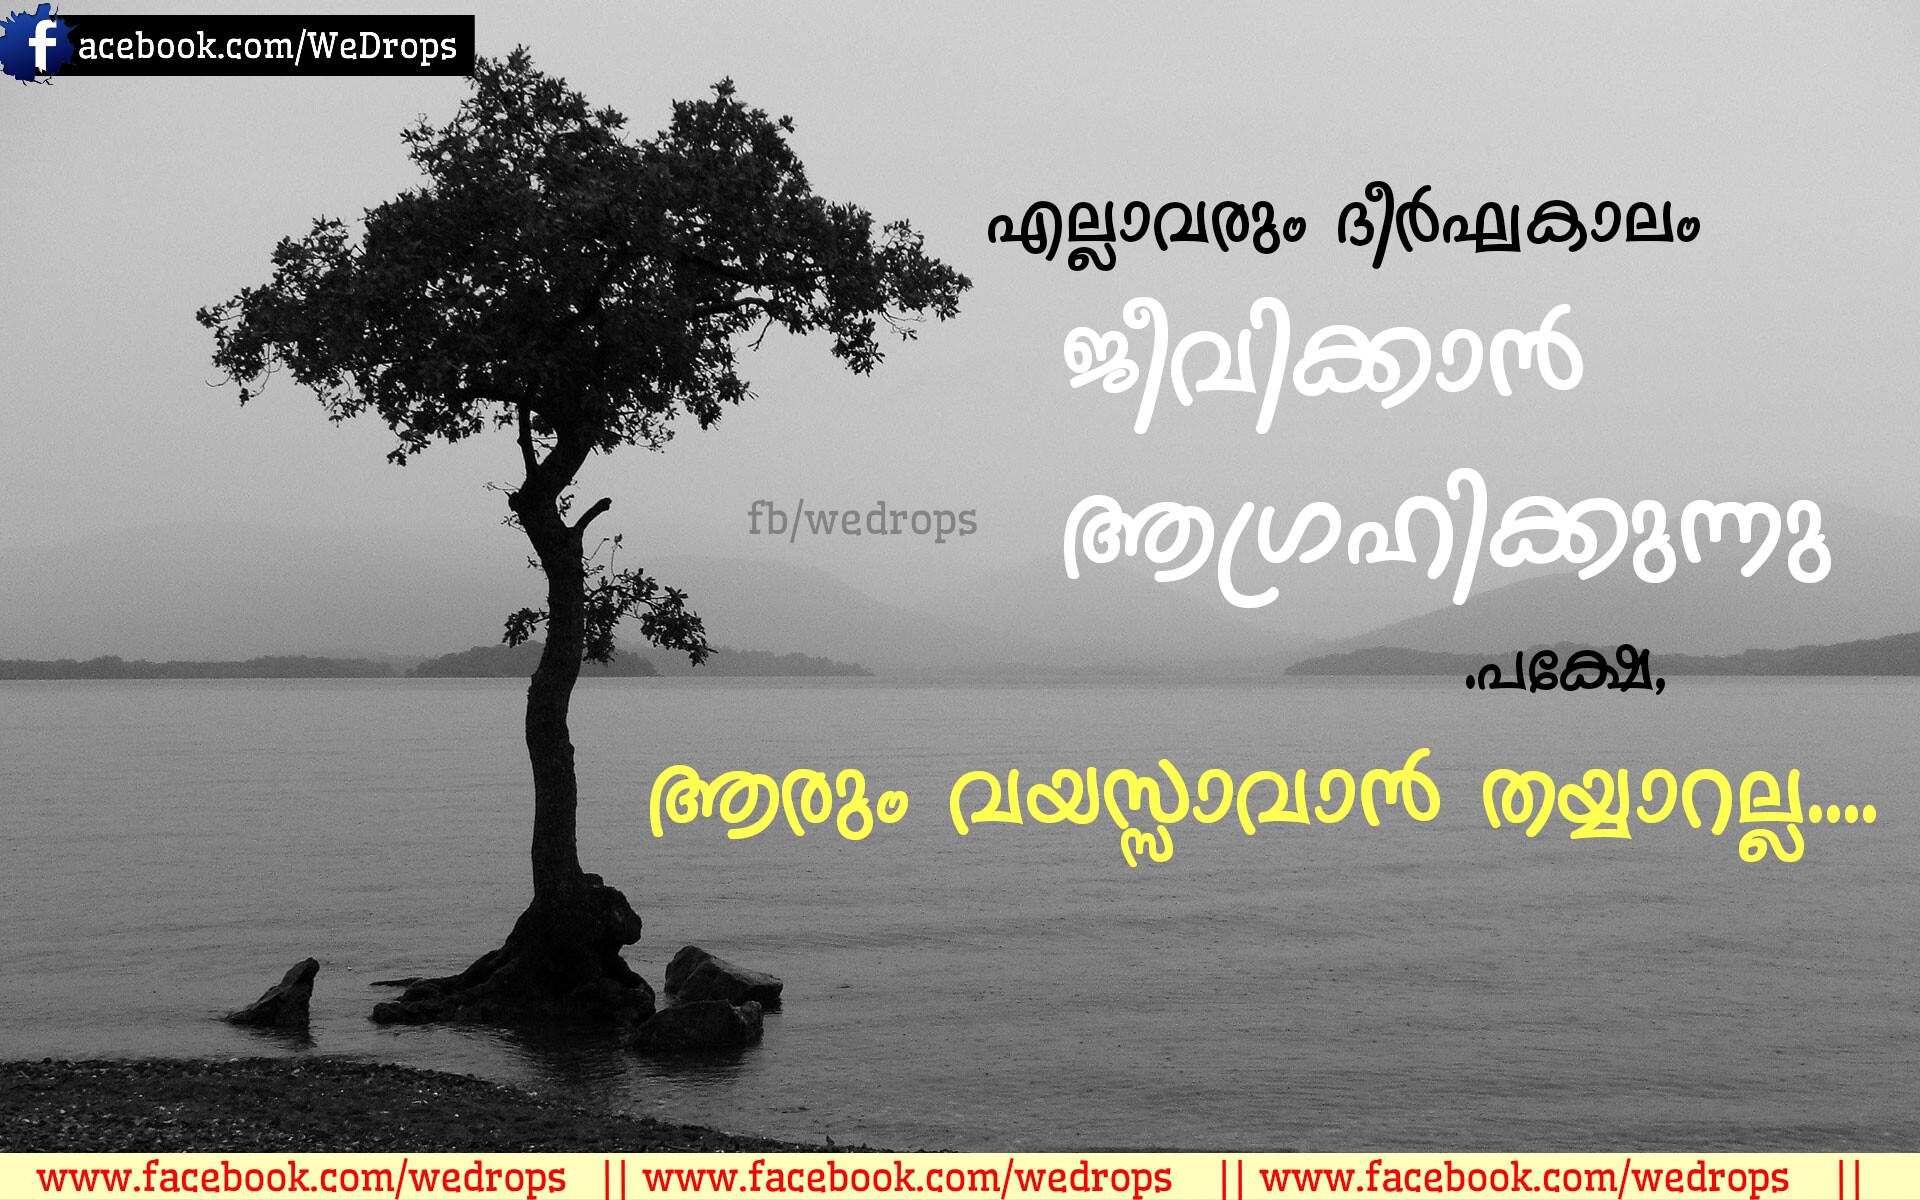 Malayalam quotes and life quotes | Malayalam Scraps,Malayalam Quotes, Malayalam Greetings,Status,Sms,Wishes,malayalam cover photos,facebook  timeline cover photos,wallpaper